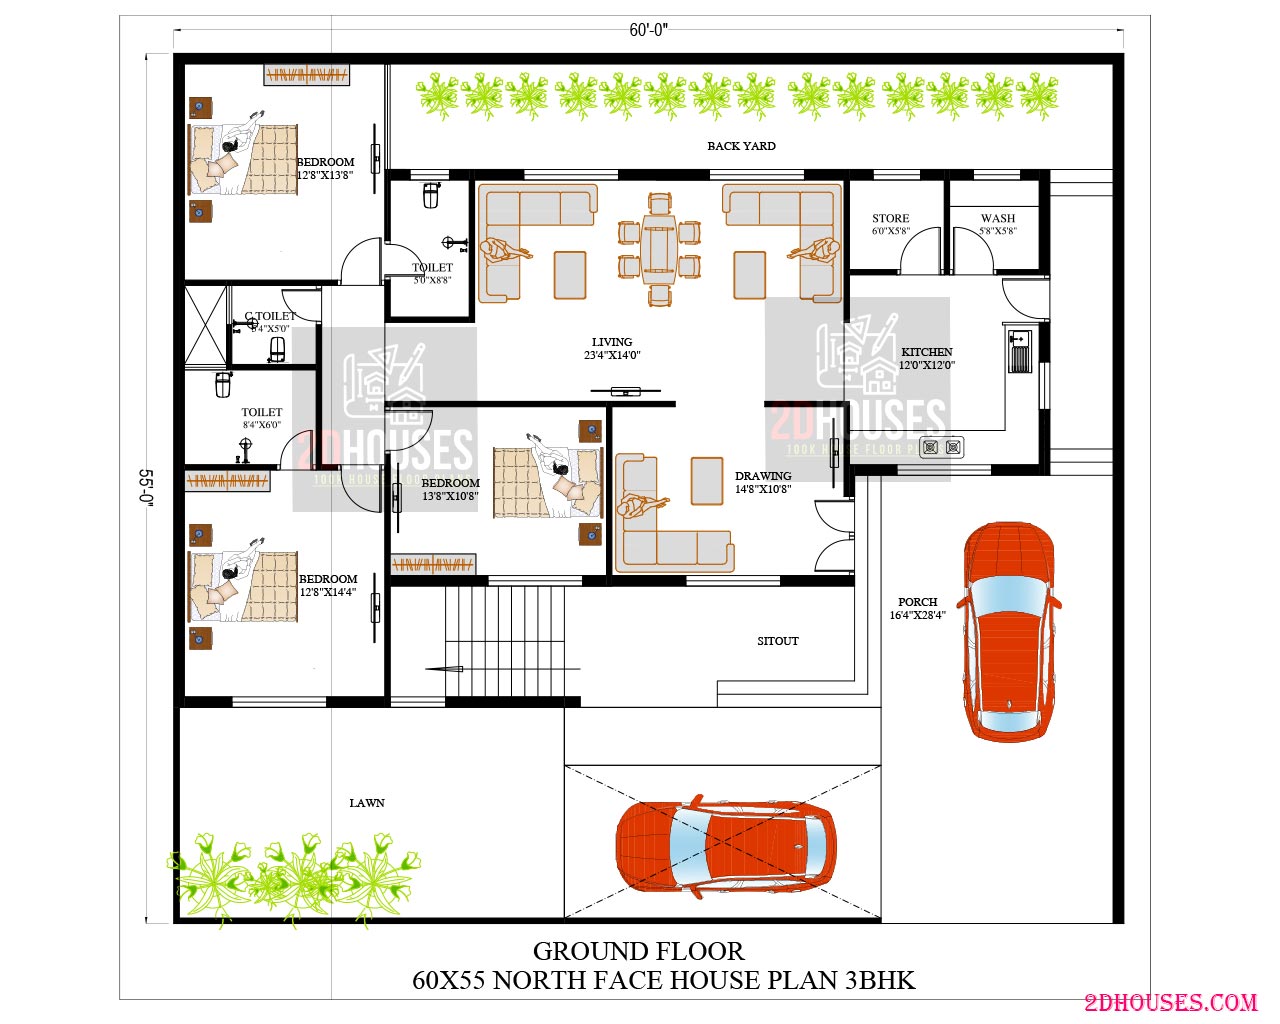 North-facing 60x55 house plans with car parking